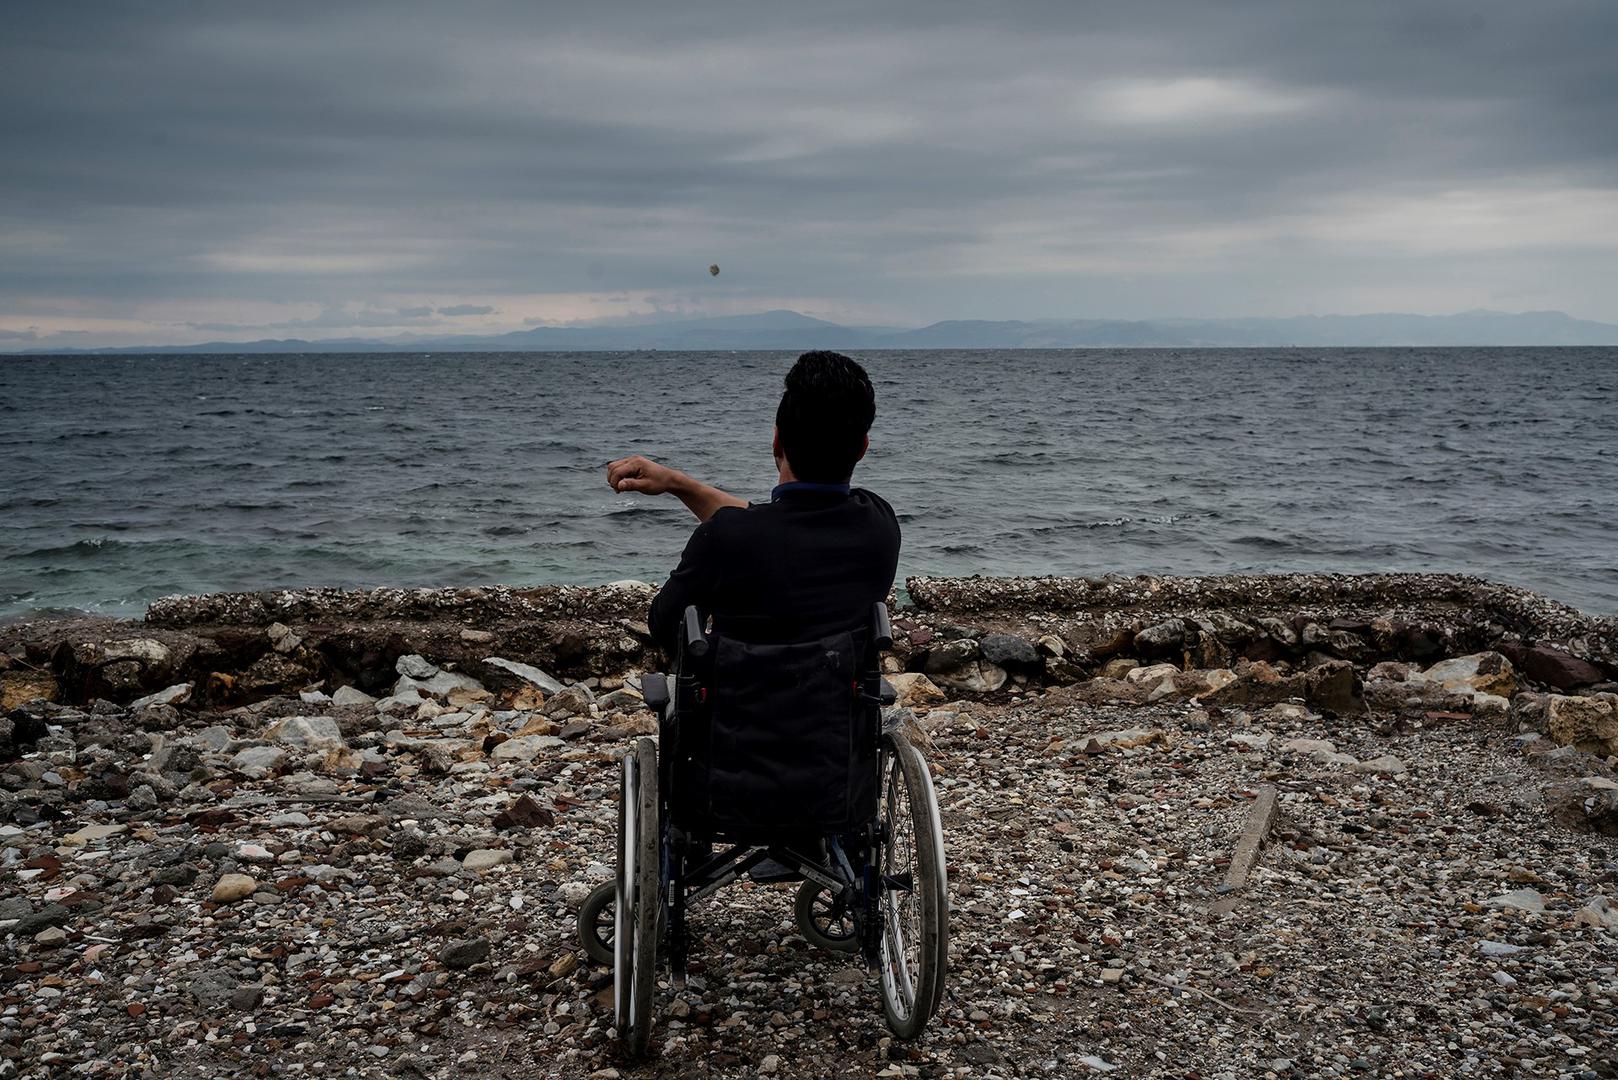 Ali, a 22-year-old Afghan asylum seeker with a disability, living in Moria camp, on the beach in Lesbos, Greece. He told Human Rights Watch he can’t access showers in the camp and sometimes tries to wash himself in the sea. 